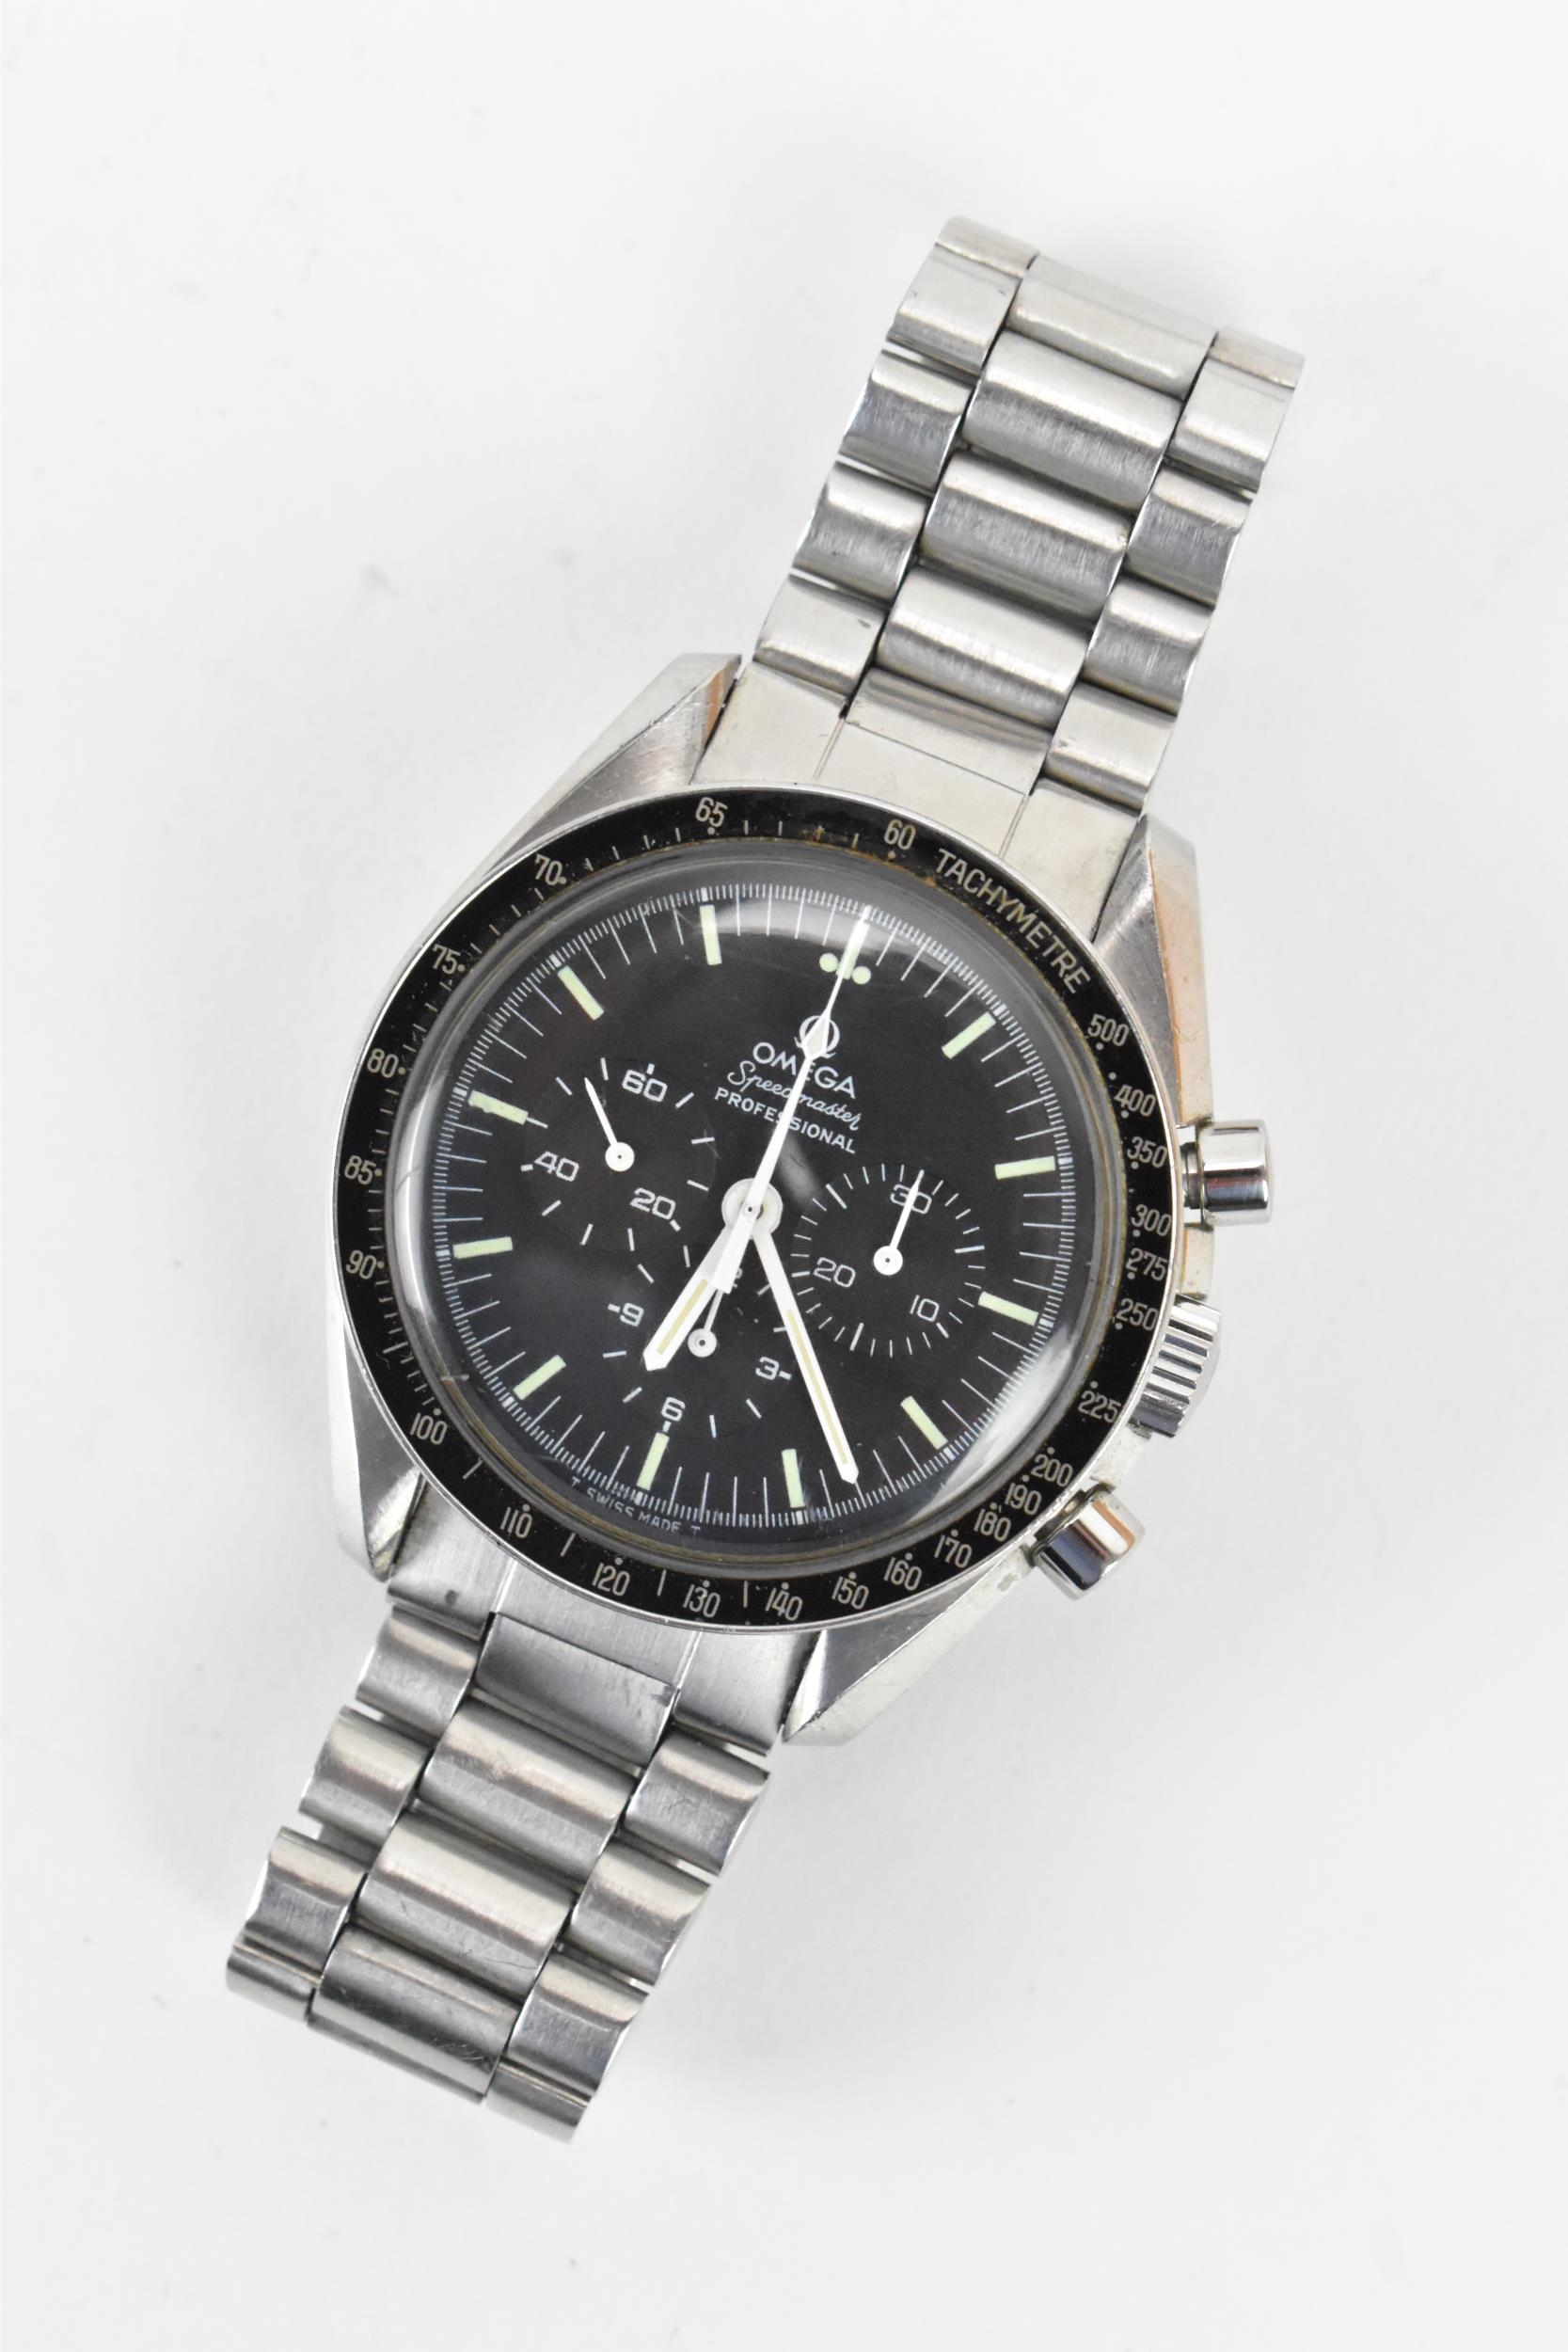 An Omega Speedmaster, chronograph, automatic, gents, stainless steel wristwatch, circa 1975, - Image 2 of 11